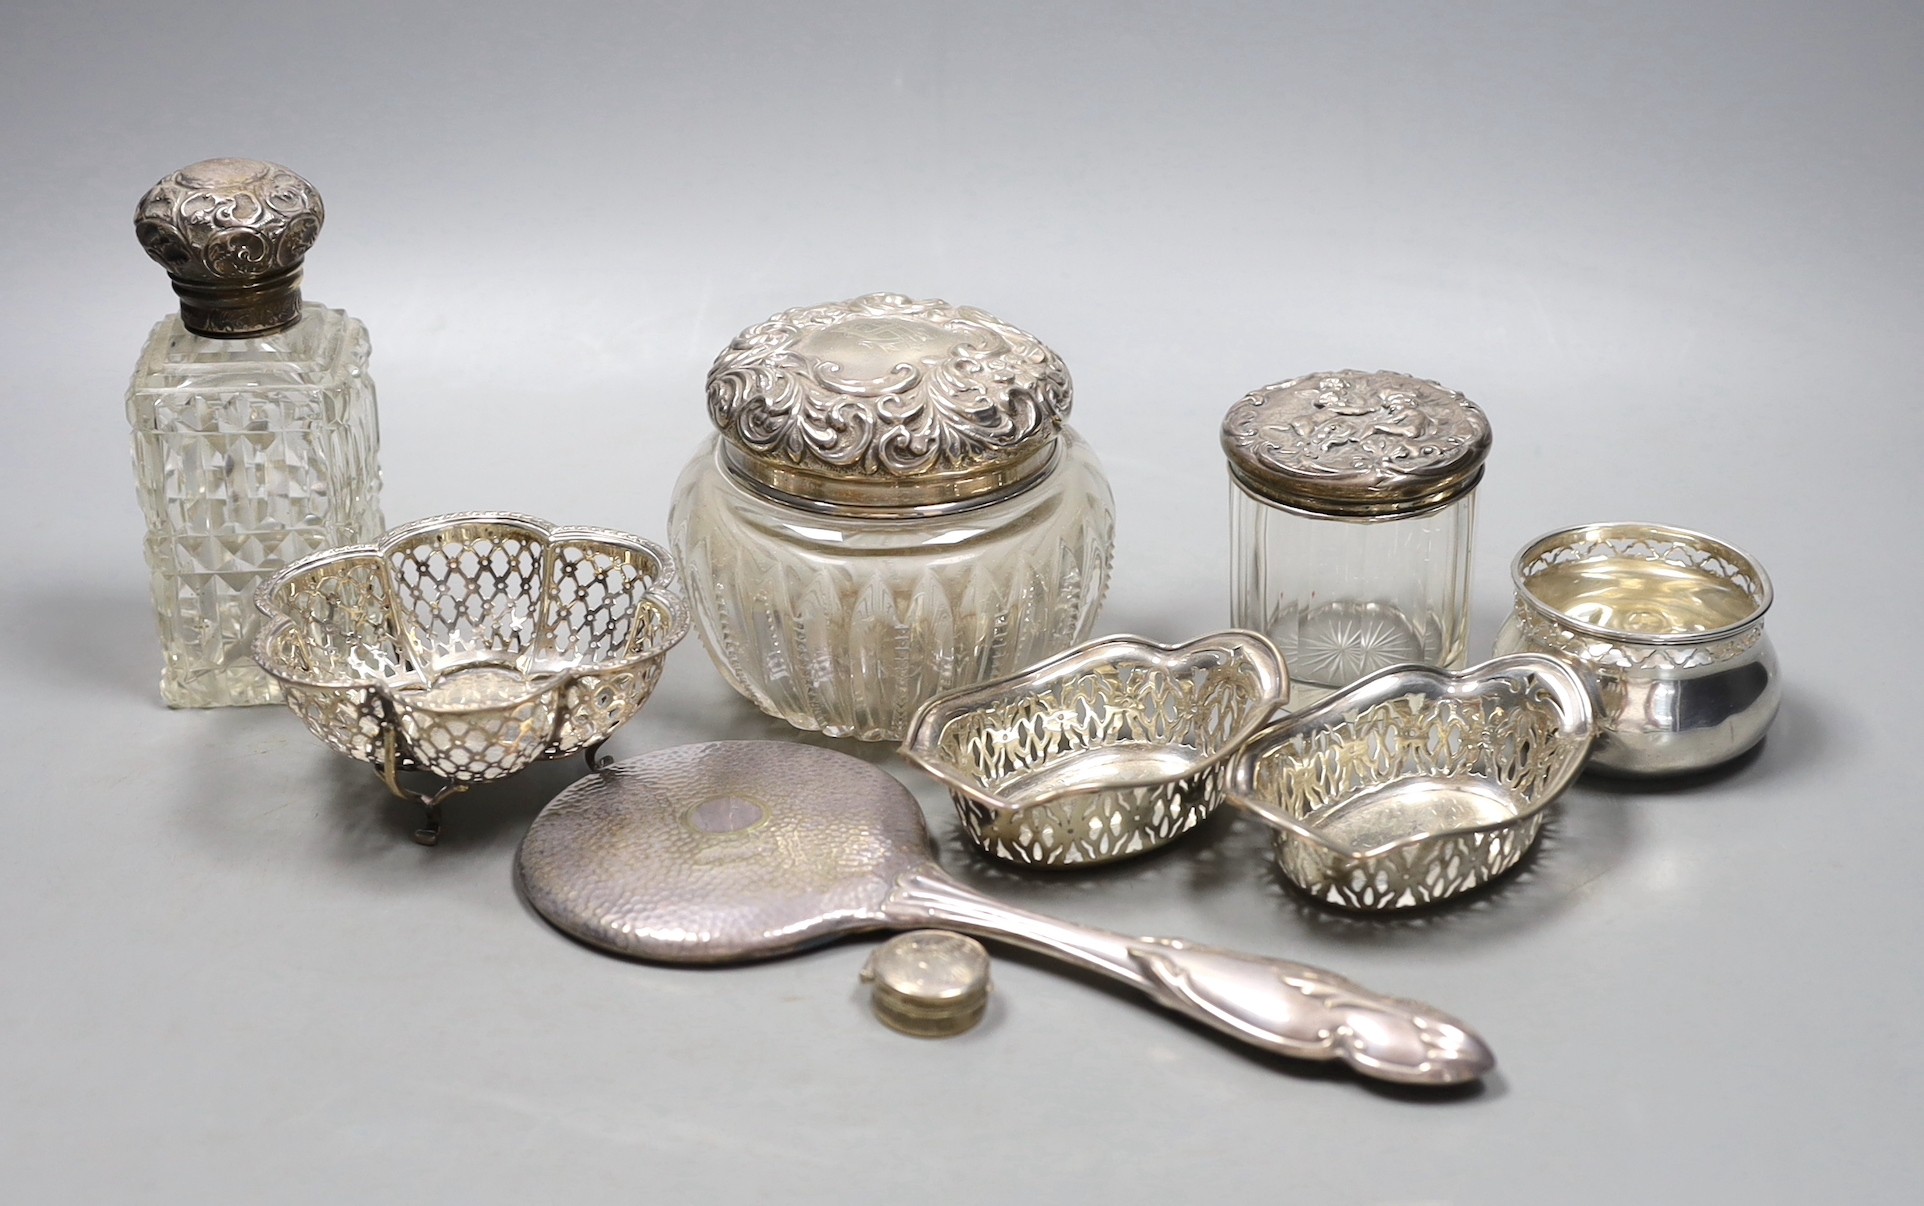 A small pair of George V pierced silver bonbon dishes, 92mm, two small pierced silver bowls, a modern silver pill box, three silver mounted glass toilet jars and a silver plated hand mirror.